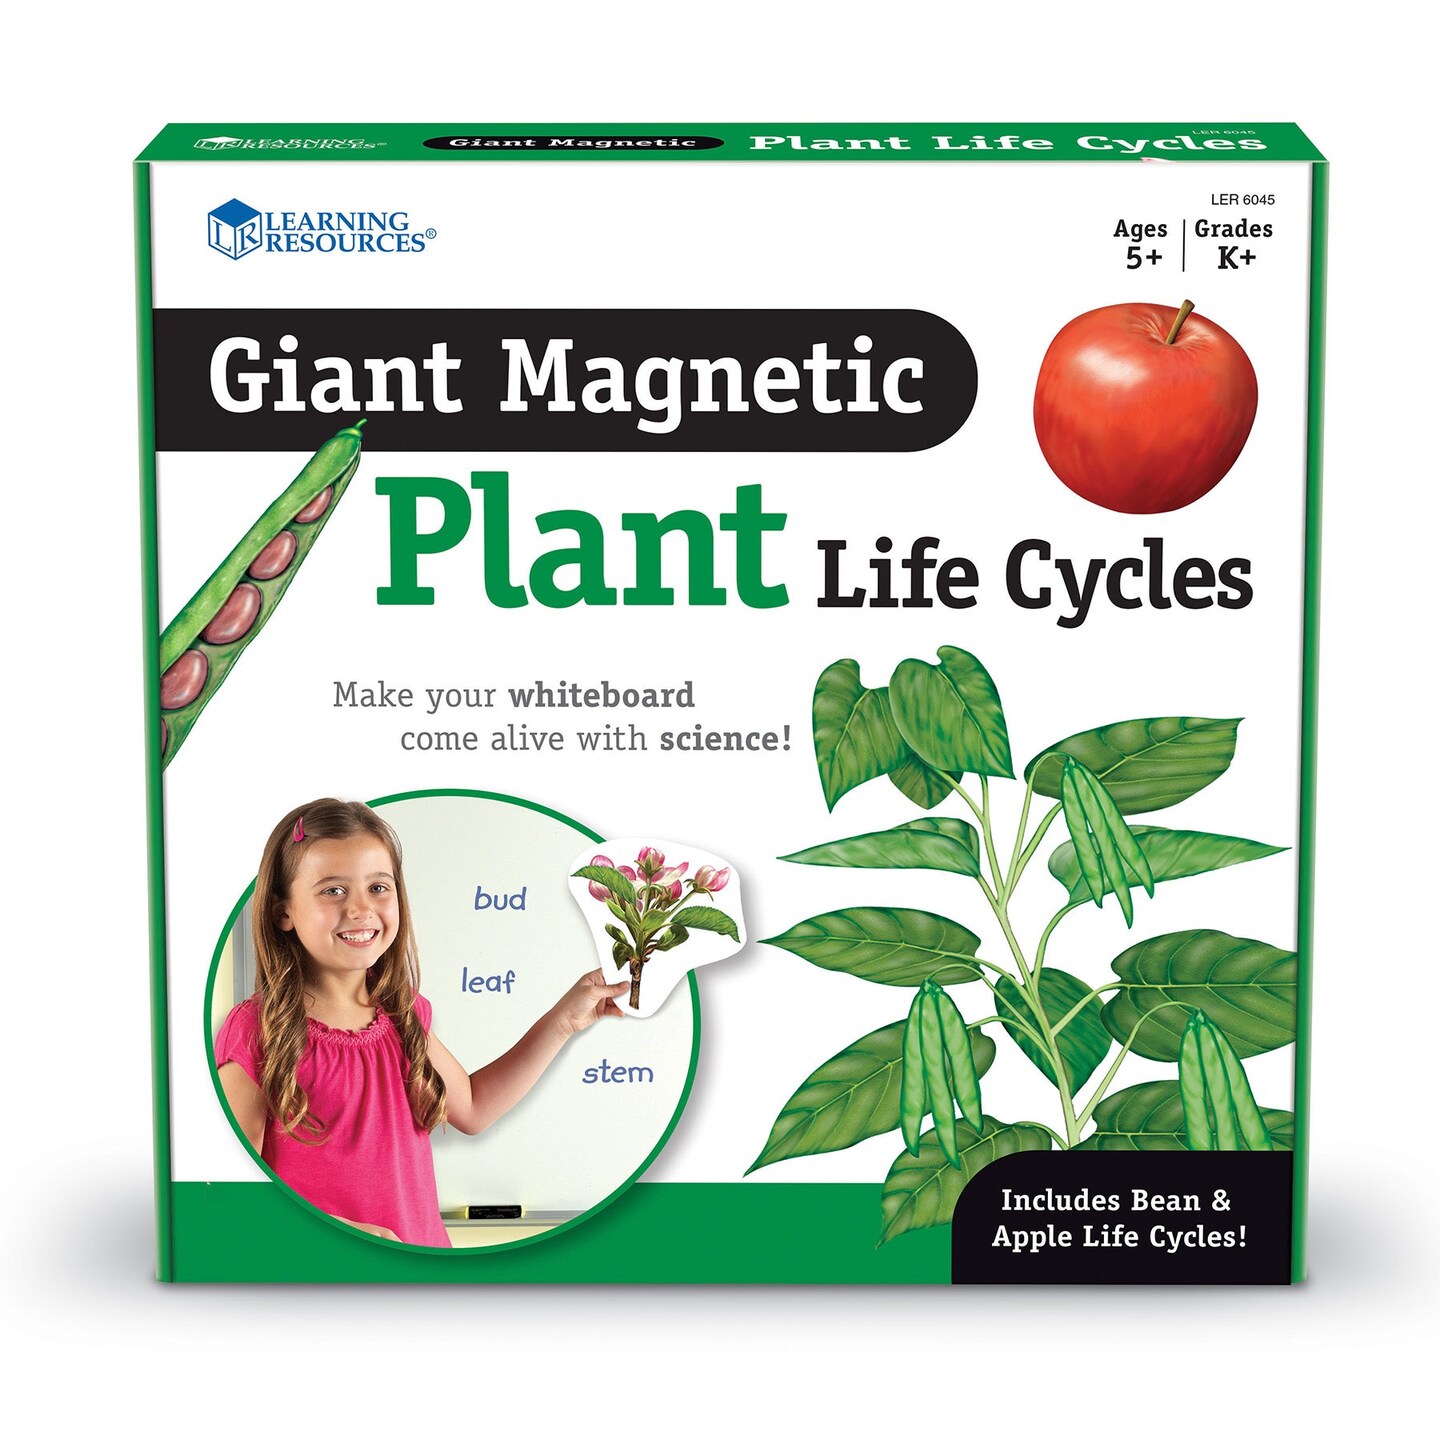 Giant Magnetic Plant Life Cycle, Set of 12